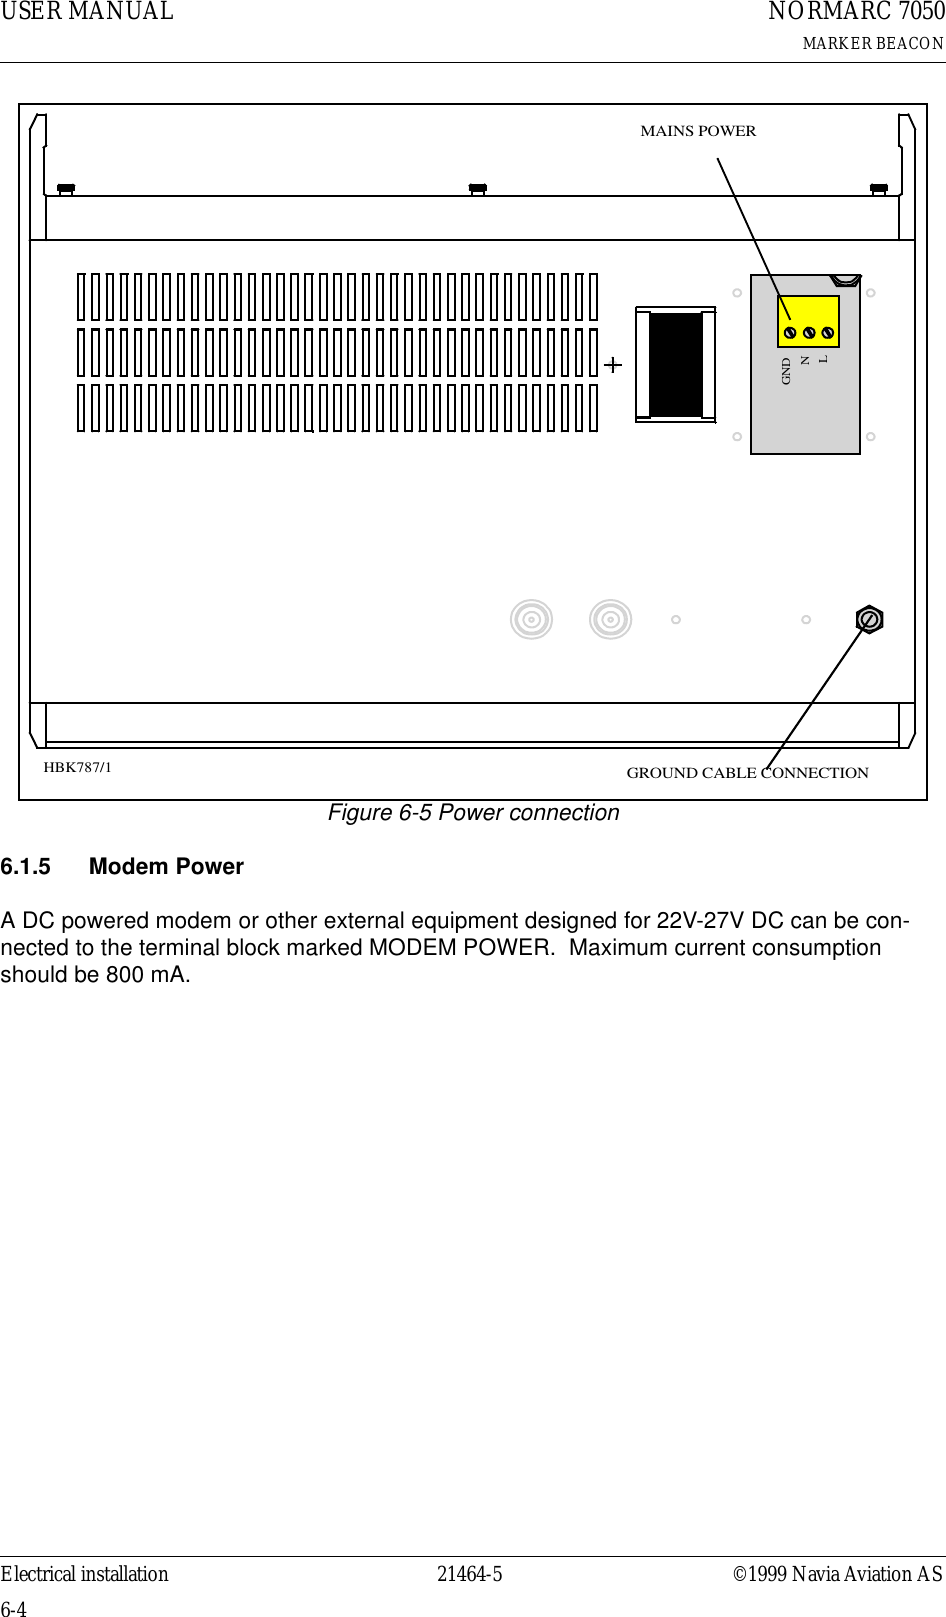 USER MANUAL6-421464-5NORMARC 7050MARKER BEACONElectrical installation ©1999 Navia Aviation AS Figure 6-5 Power connection6.1.5 Modem PowerA DC powered modem or other external equipment designed for 22V-27V DC can be con-nected to the terminal block marked MODEM POWER.  Maximum current consumption should be 800 mA.MAINS POWERGNDLNGROUND CABLE CONNECTIONHBK787/1